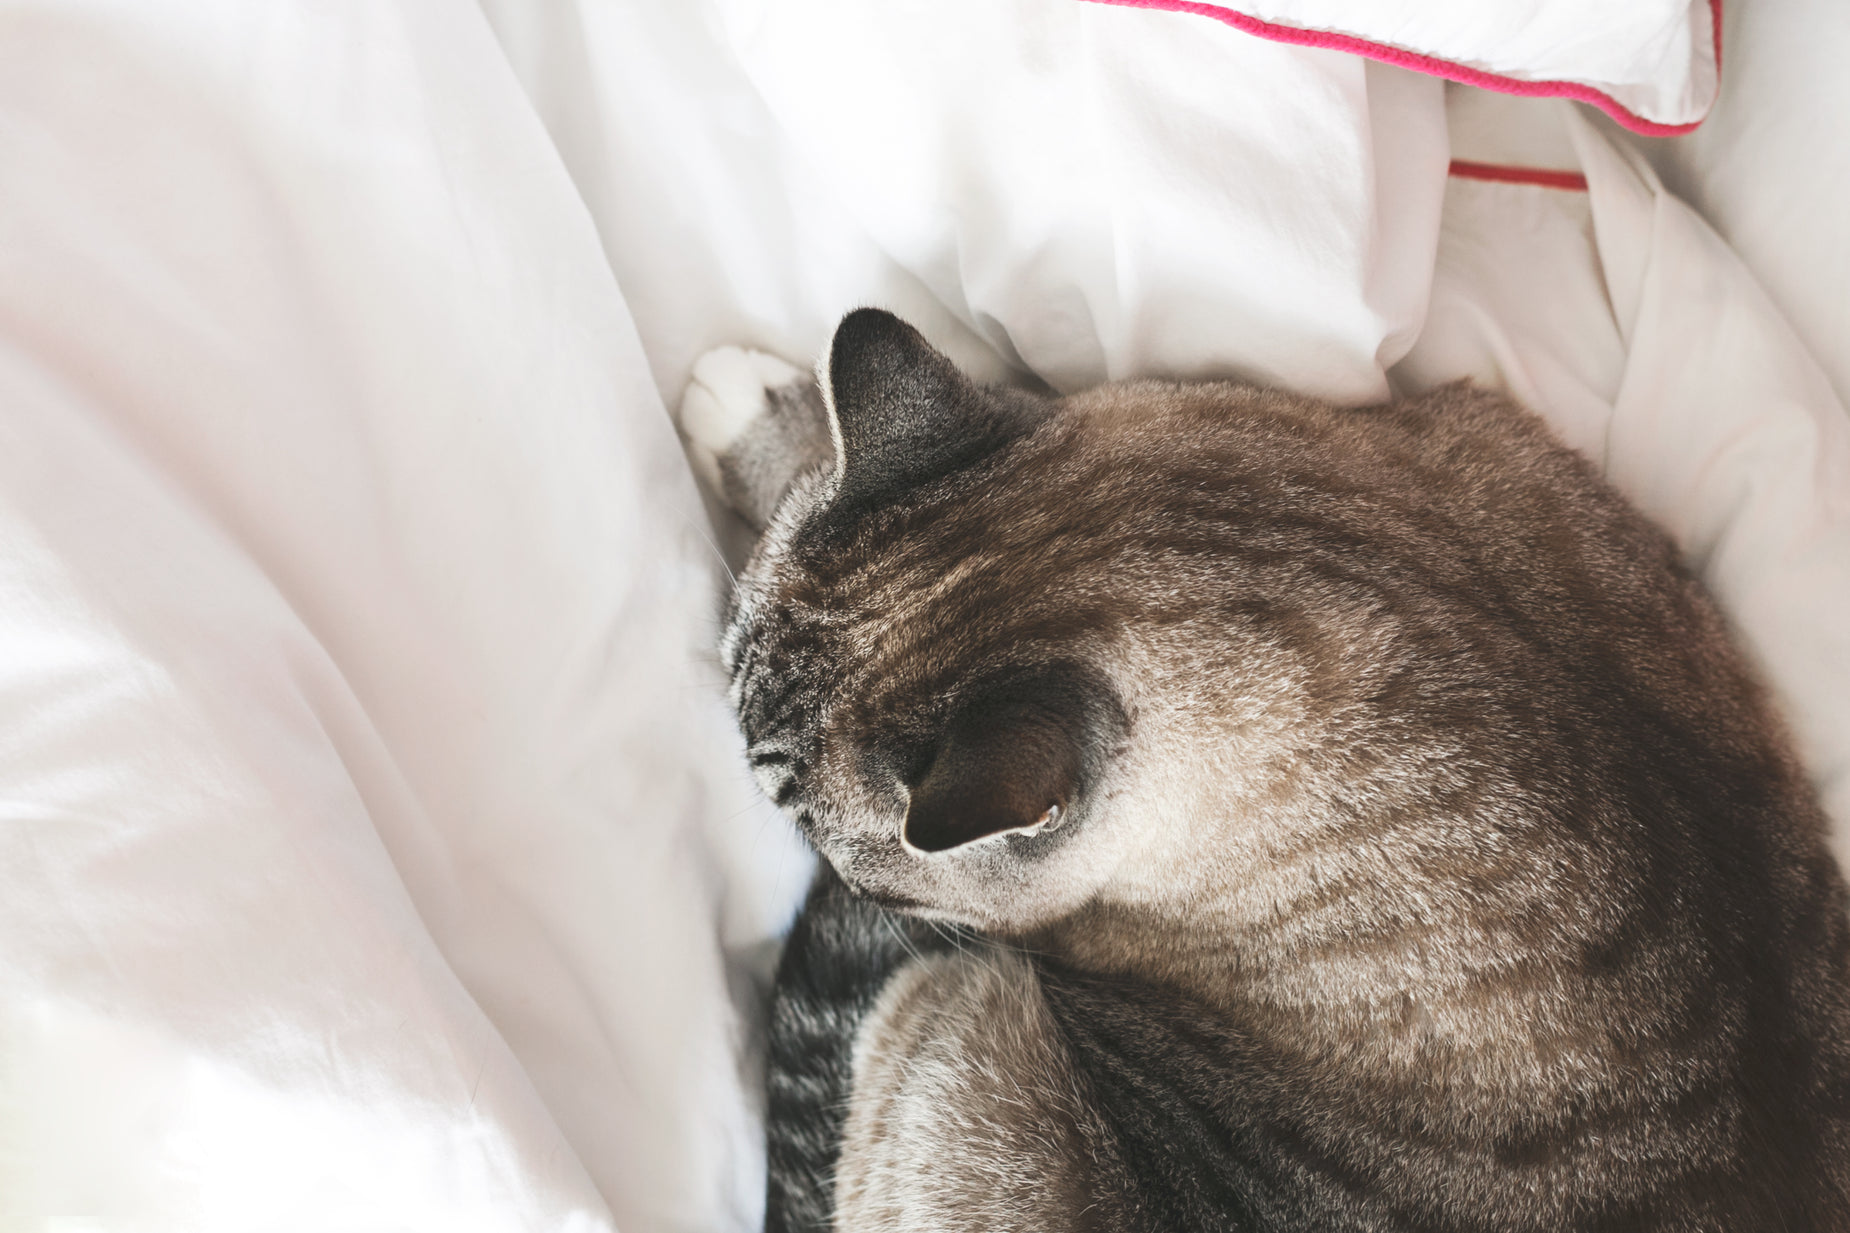 an image of a cat that is sleeping on the bed